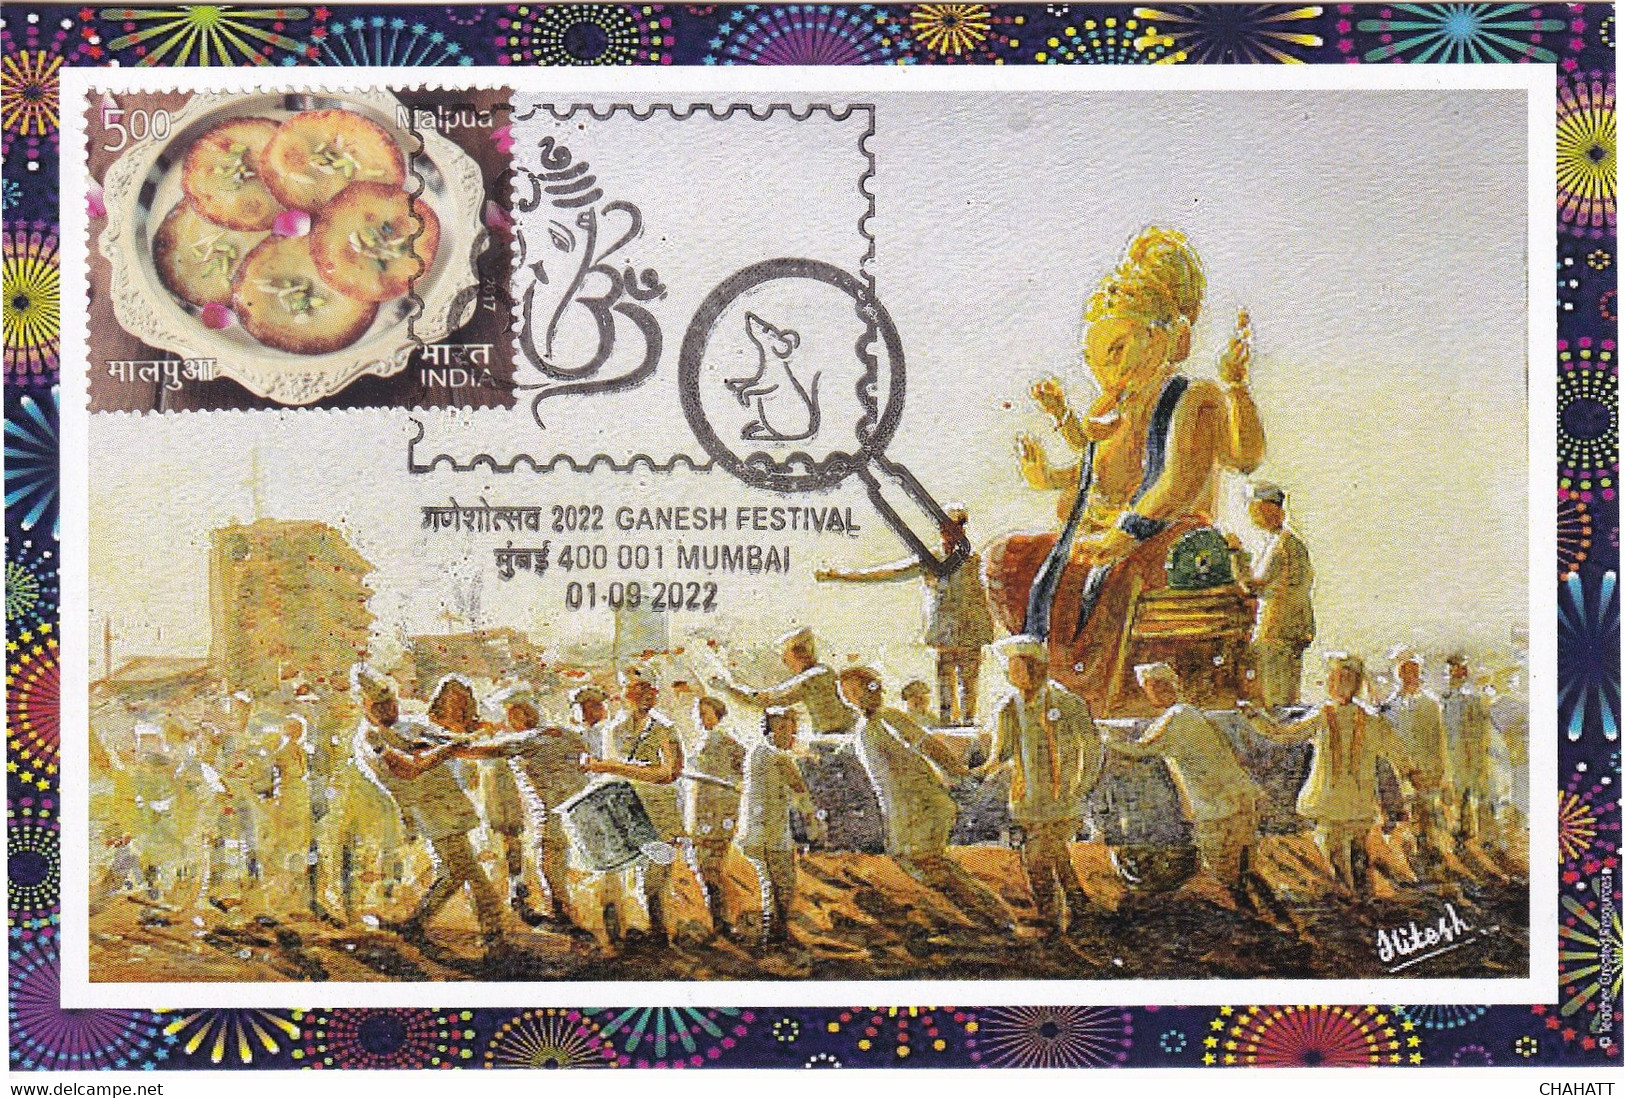 HINDUISM - LORD GANESHA - FESTIVAL -PPC WITH PICTORIAL CANCEL -#1 OF 15 -INDIA-2022- NMC2-35 - Hinduismo